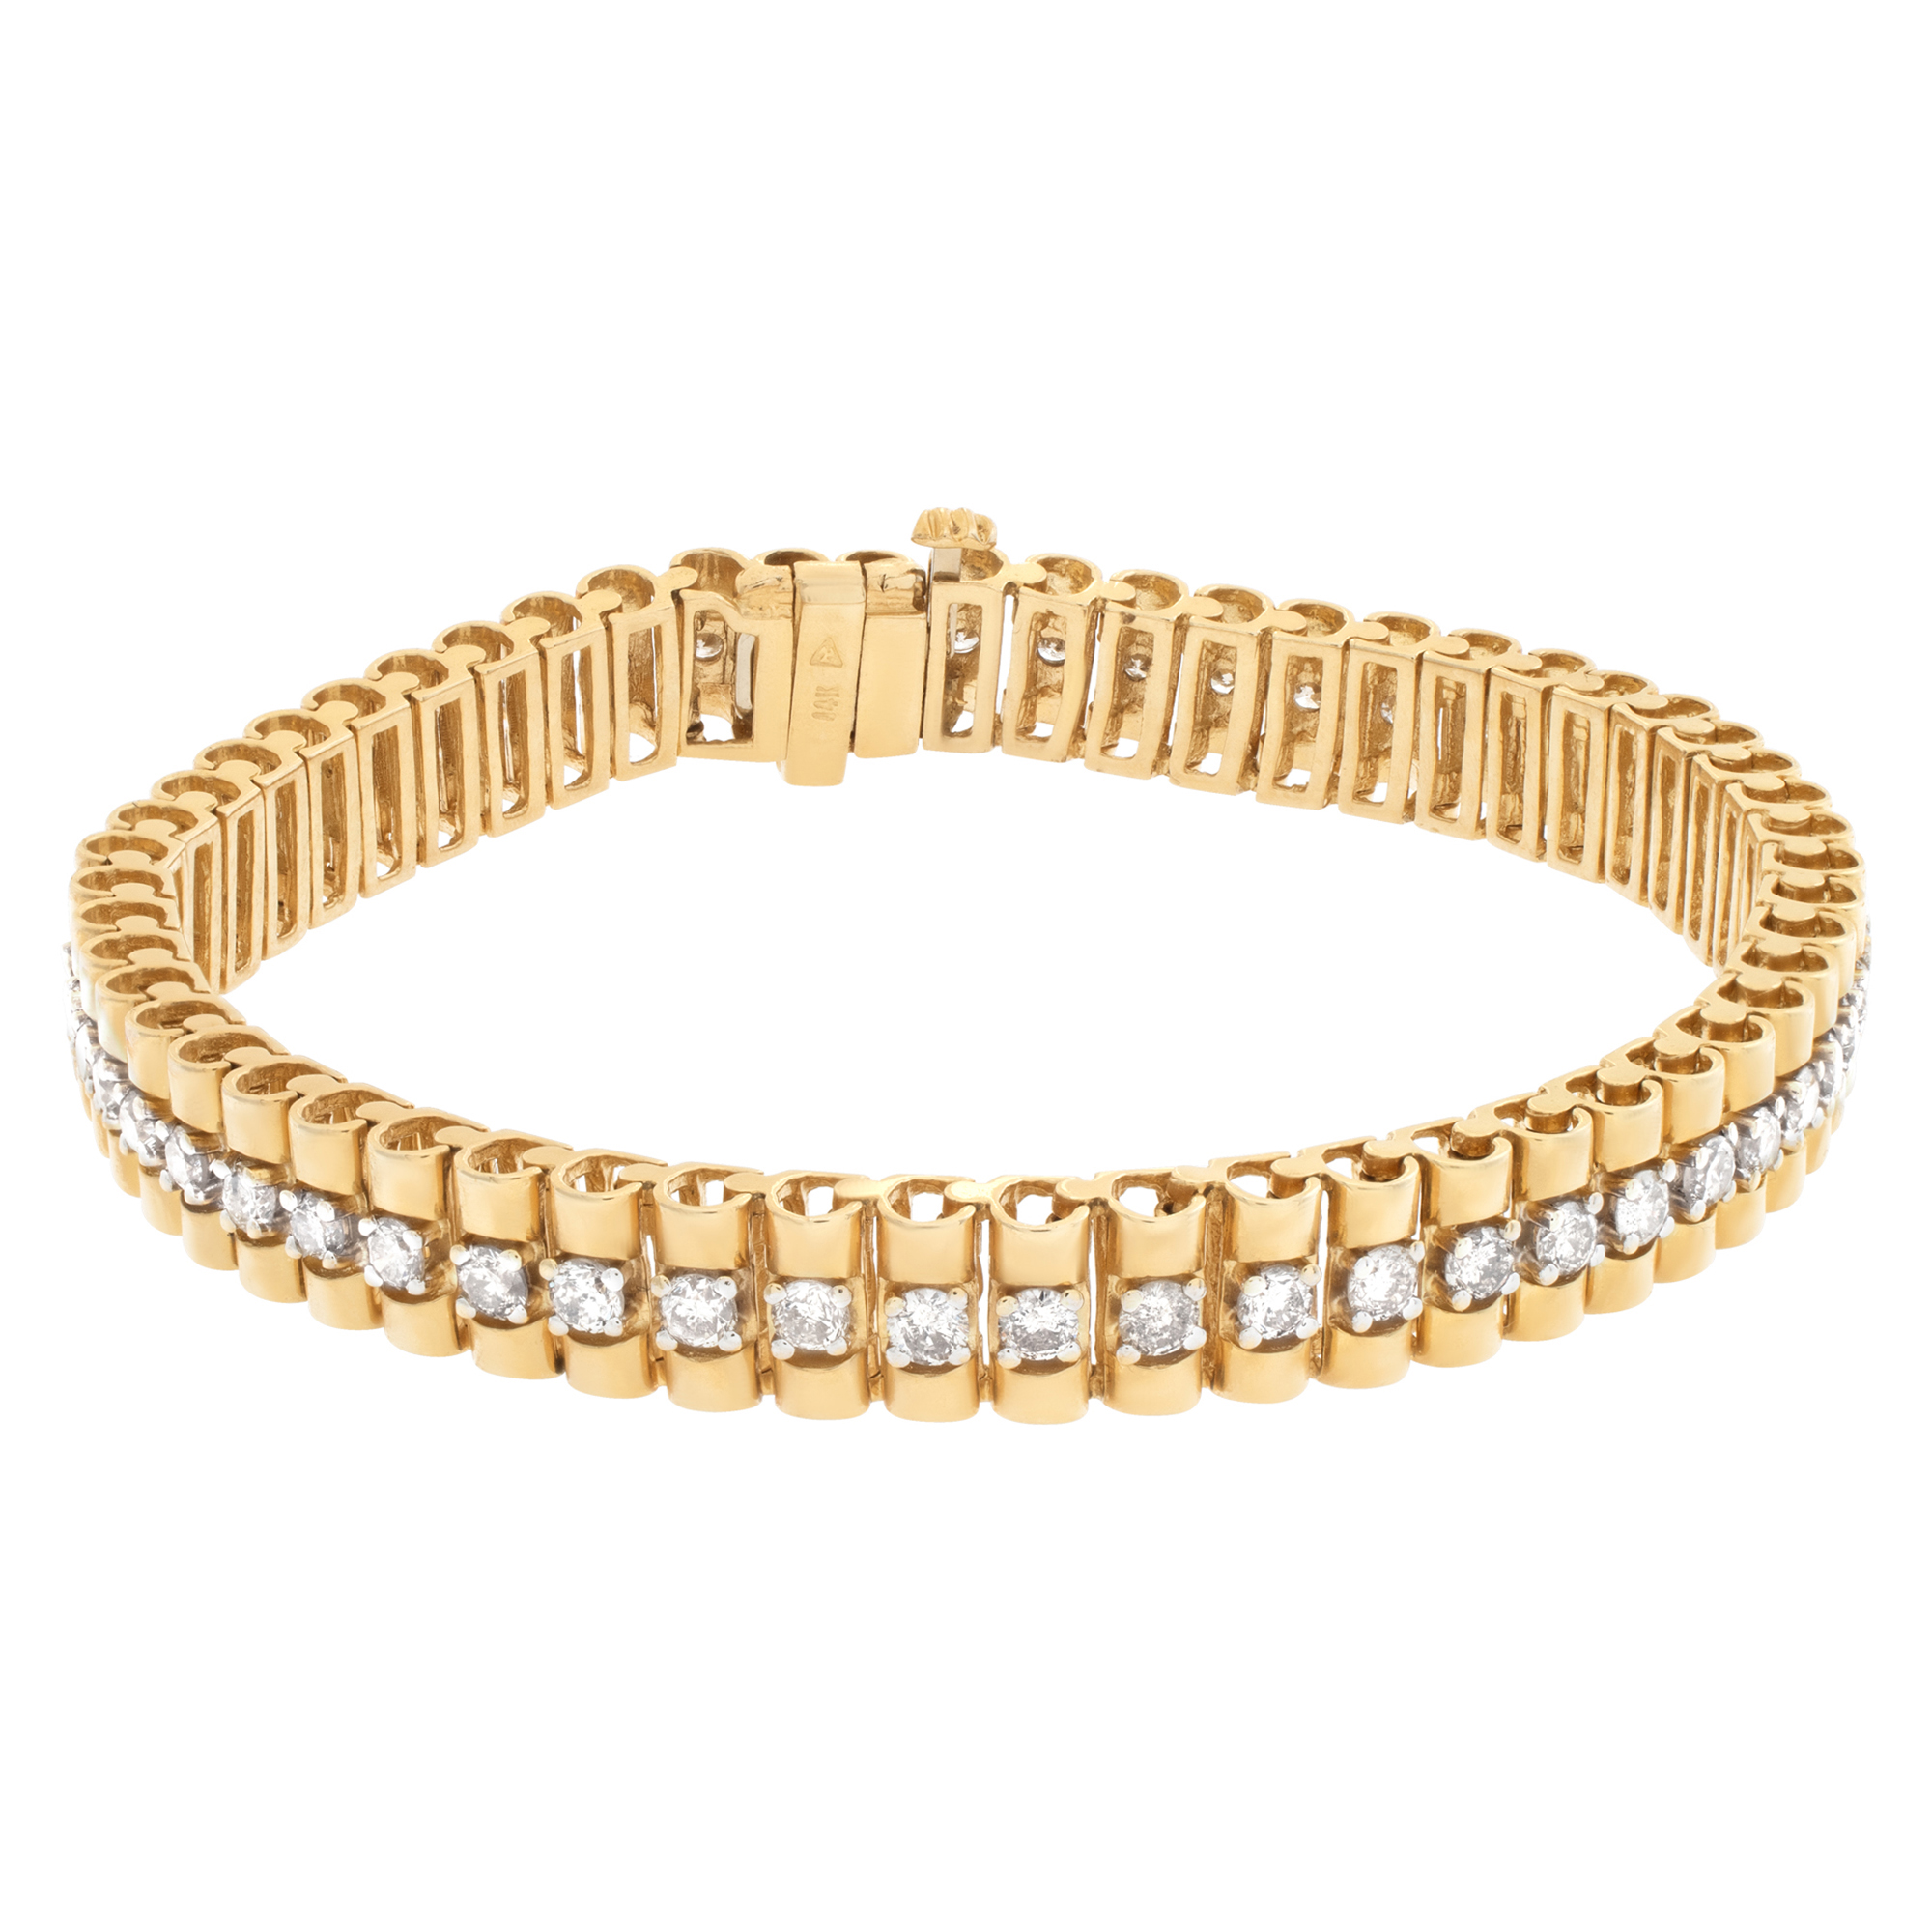 Stylish president style link bracelet with approximately 3 carats full cut round brilliant diamonds set in 14k yellow gold